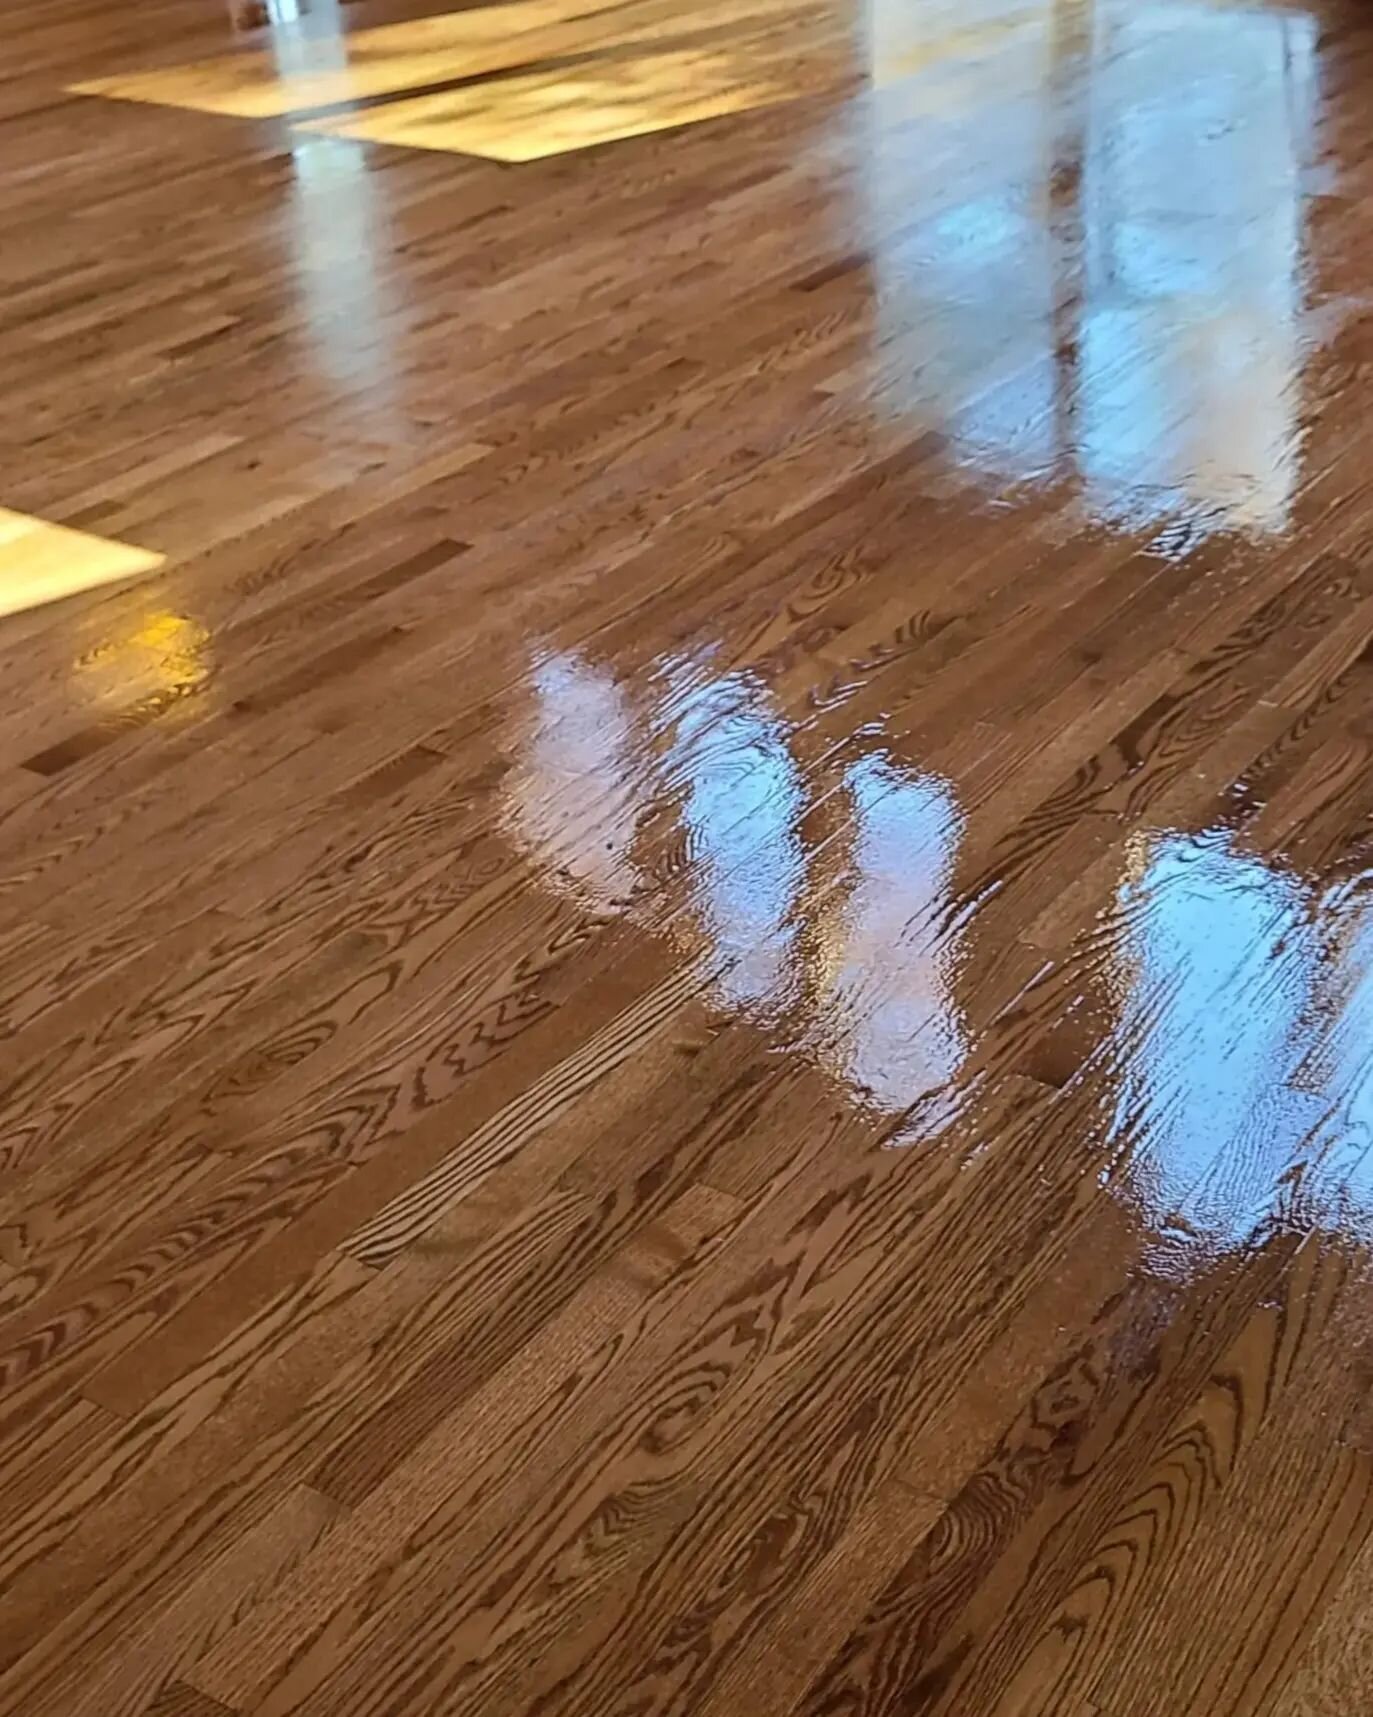 Existing red oak refinished using Bona DriFast stain in Nutmeg and finished with Bona Traffic HD (still wet in pictures). This client's floor originally was a beautiful deeper brown but there was a lot of scratches, some repairs were needed, and they